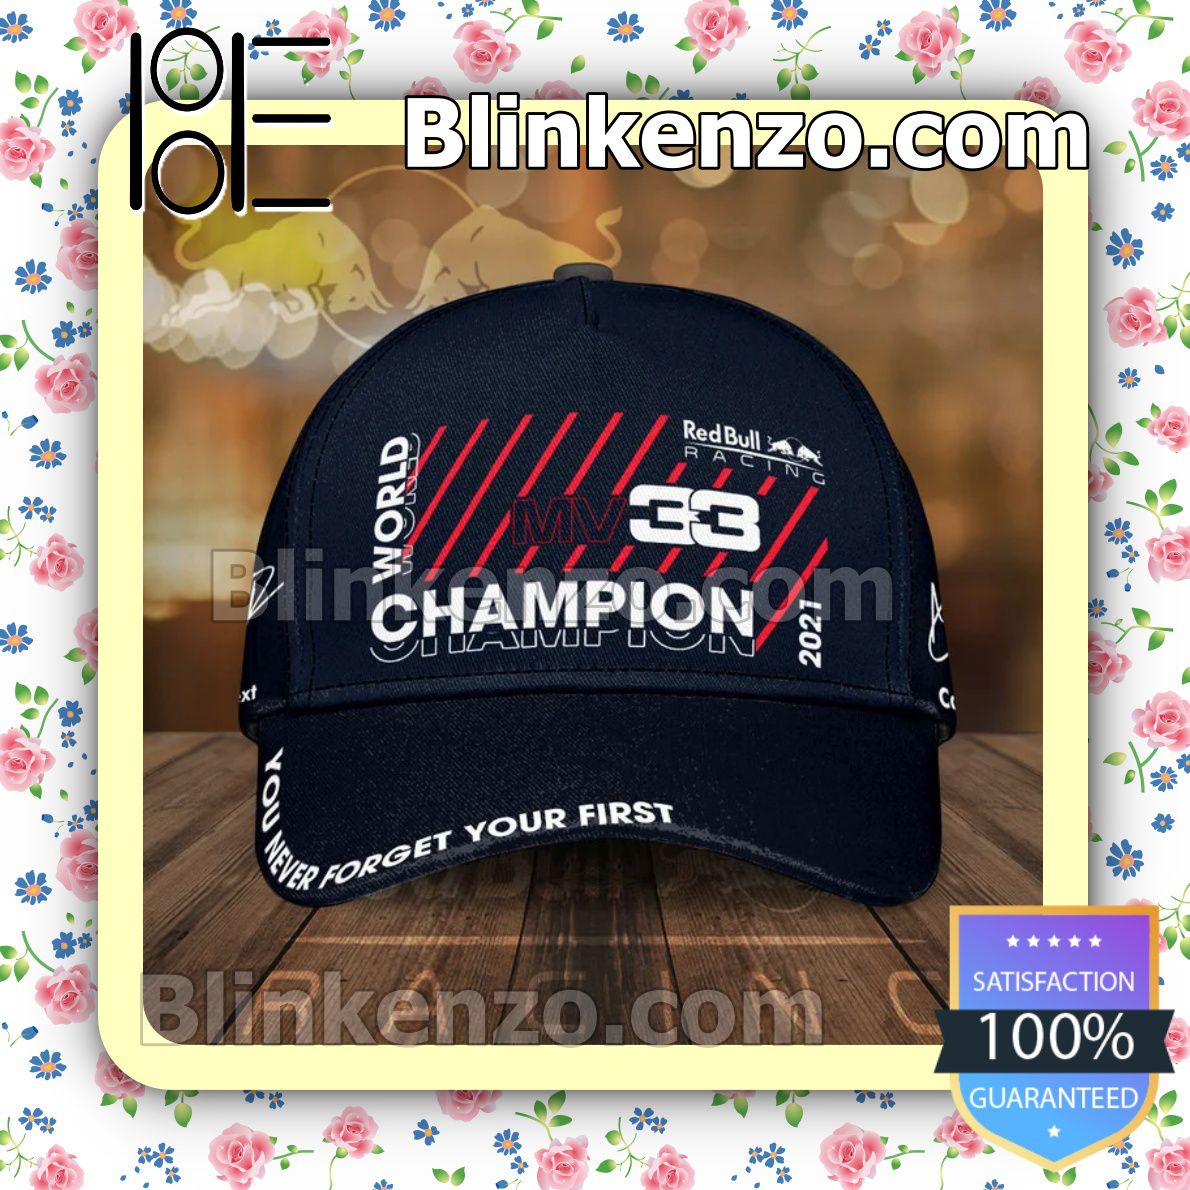 Get Here Red Bull Racing Mv 33 World Champion 2021 You Never Forget Your First Baseball Caps Gift For Boyfriend